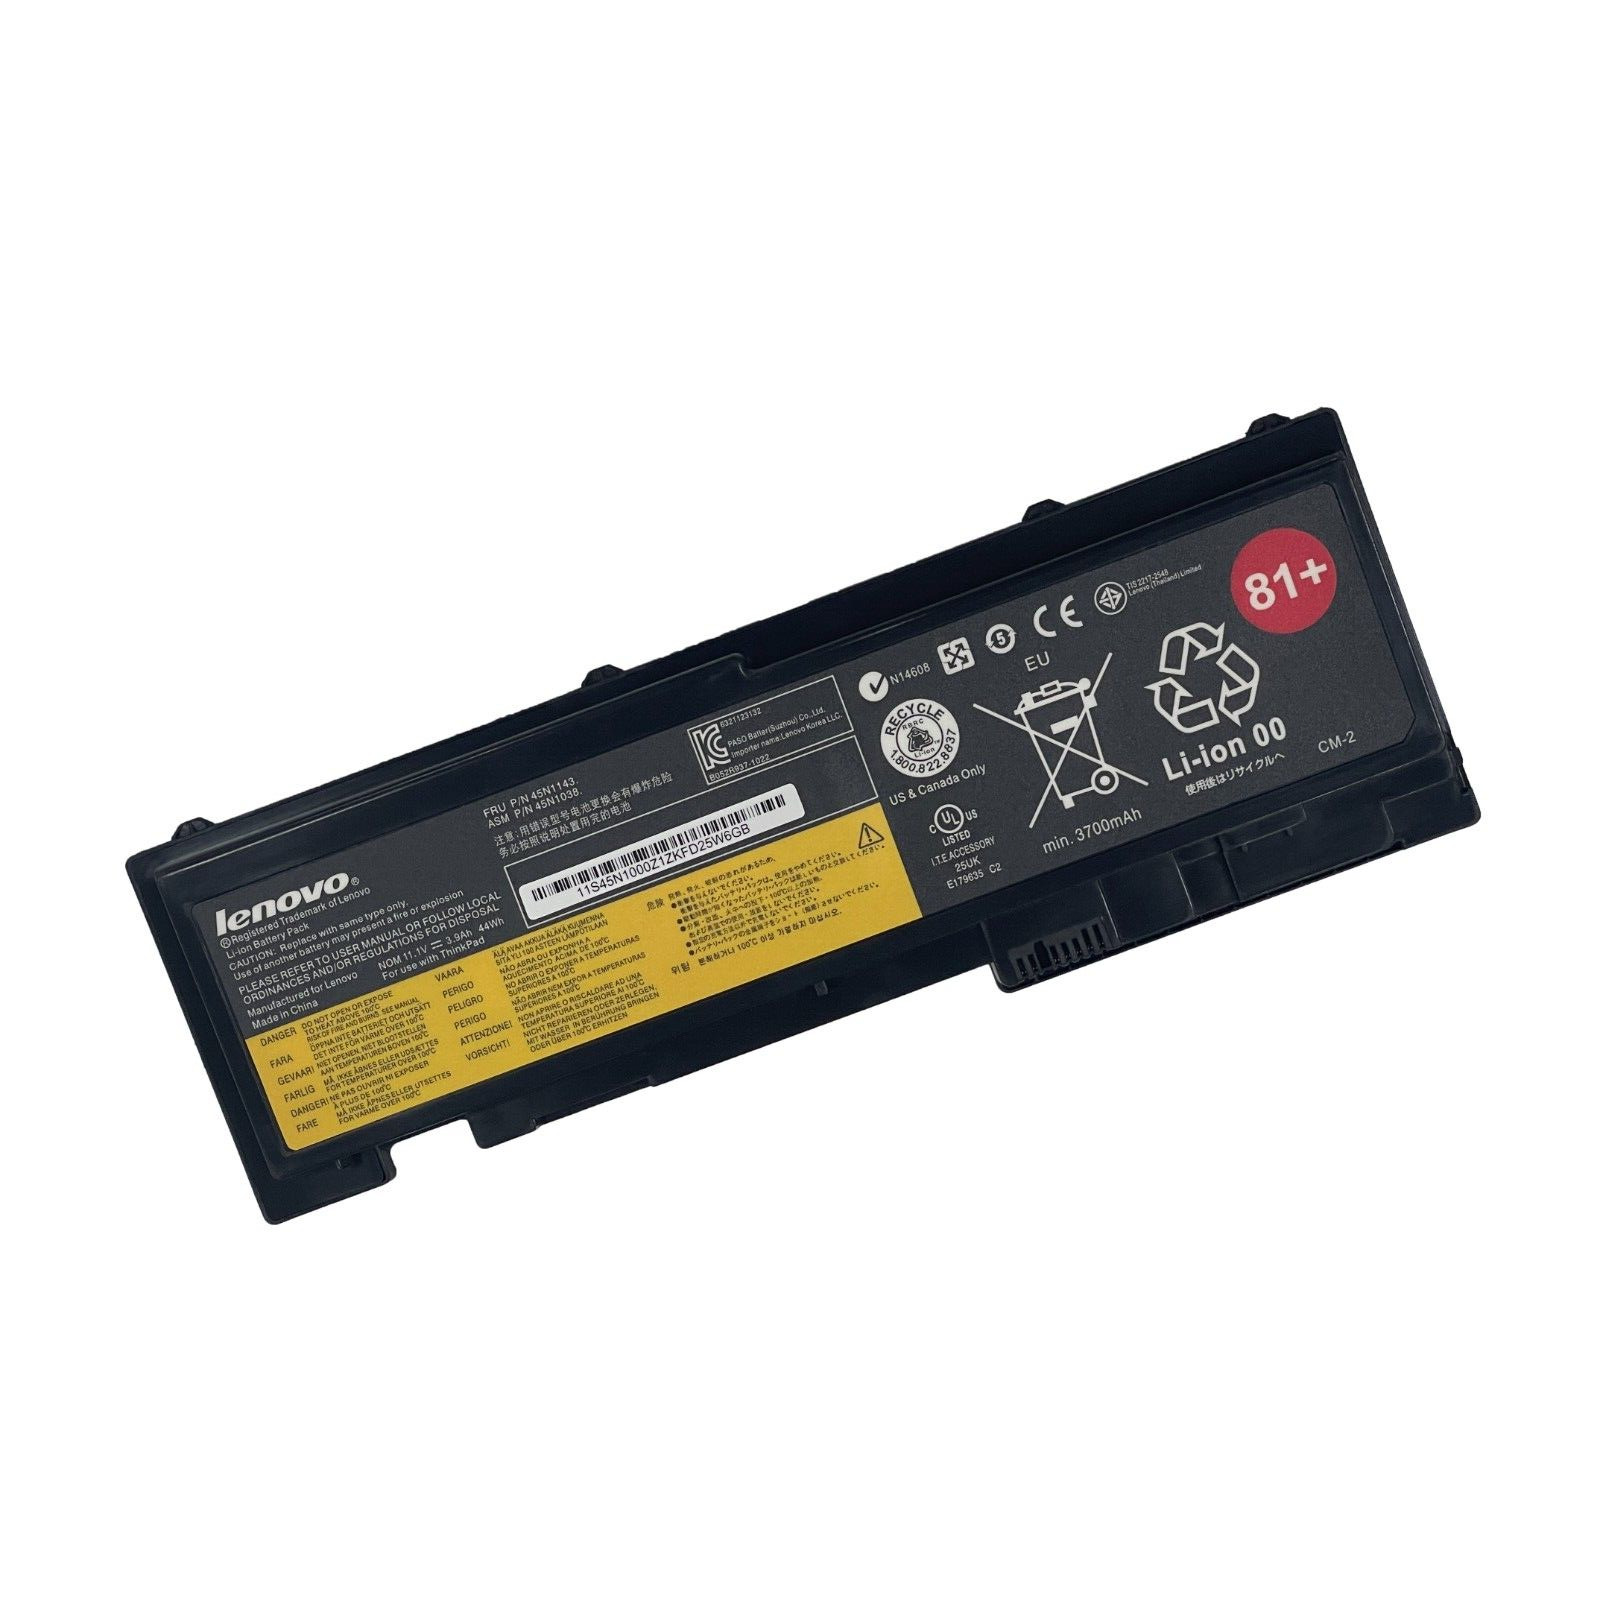 NEW OEM 44Wh Battery For Lenovo ThinkPad T430s T420s T420i 0A36287 42T4844 81+